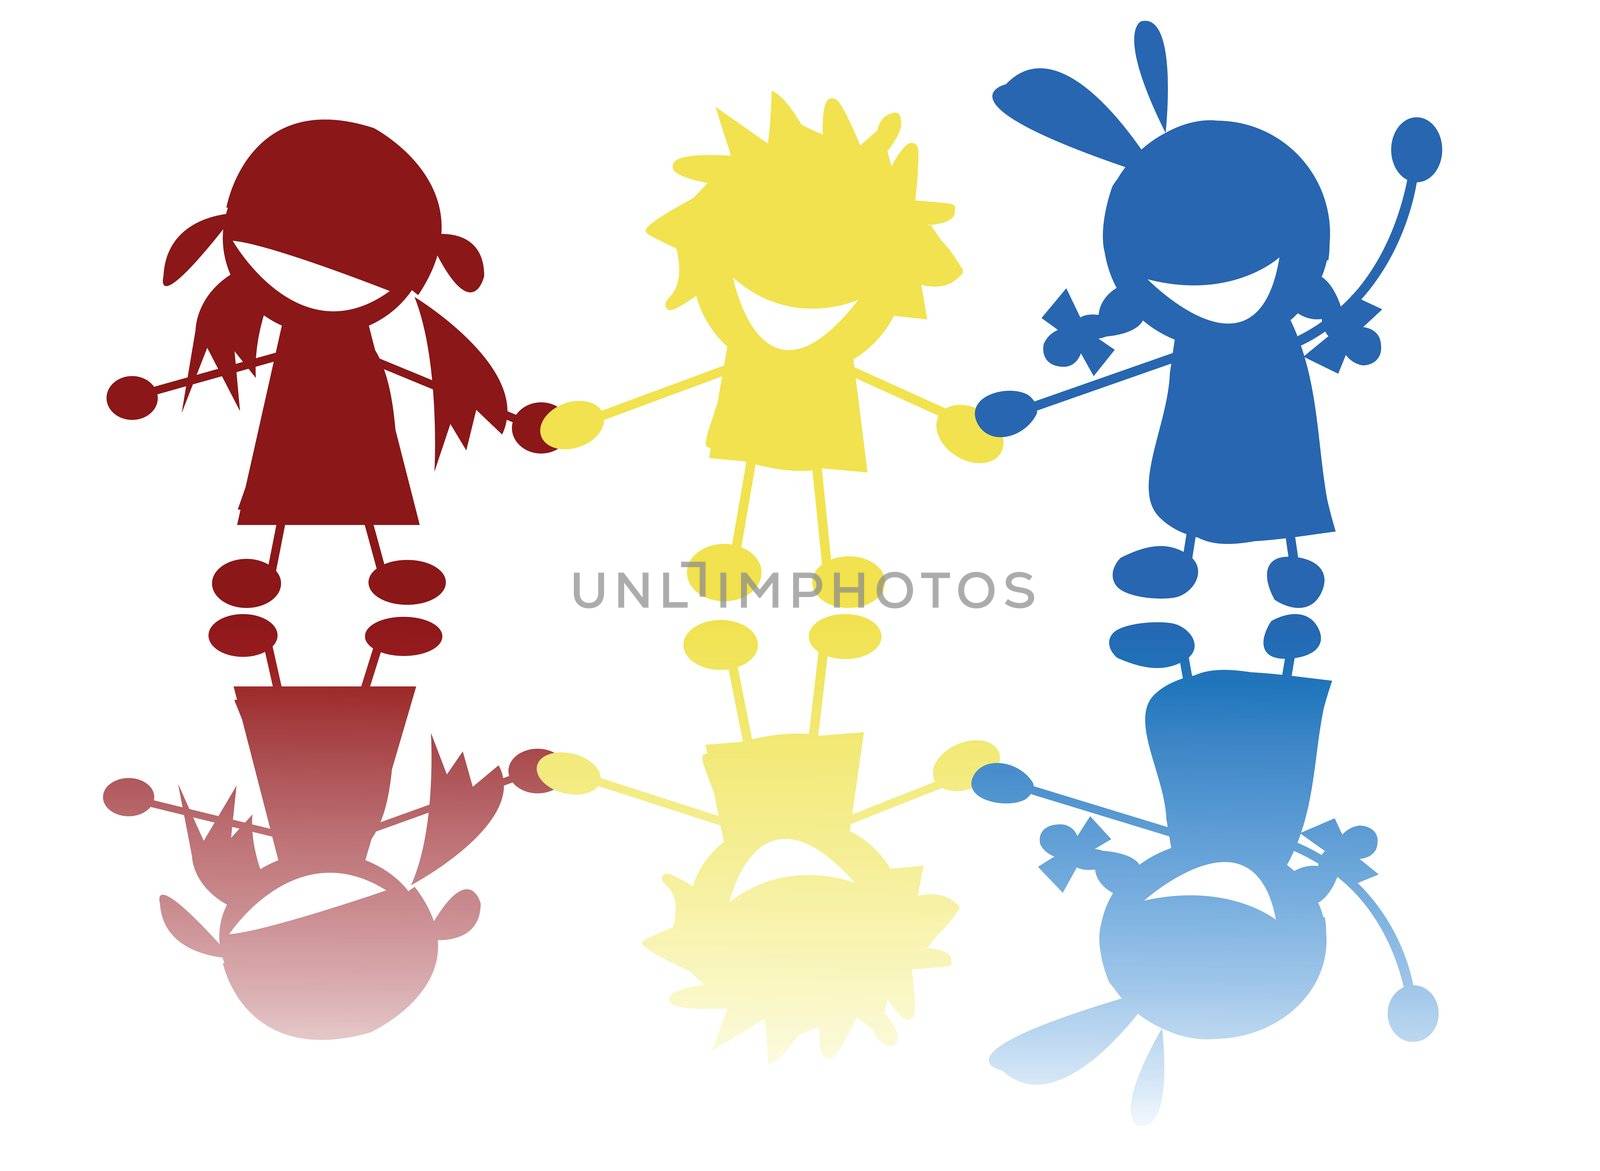 Colored children silhouettes holding hands